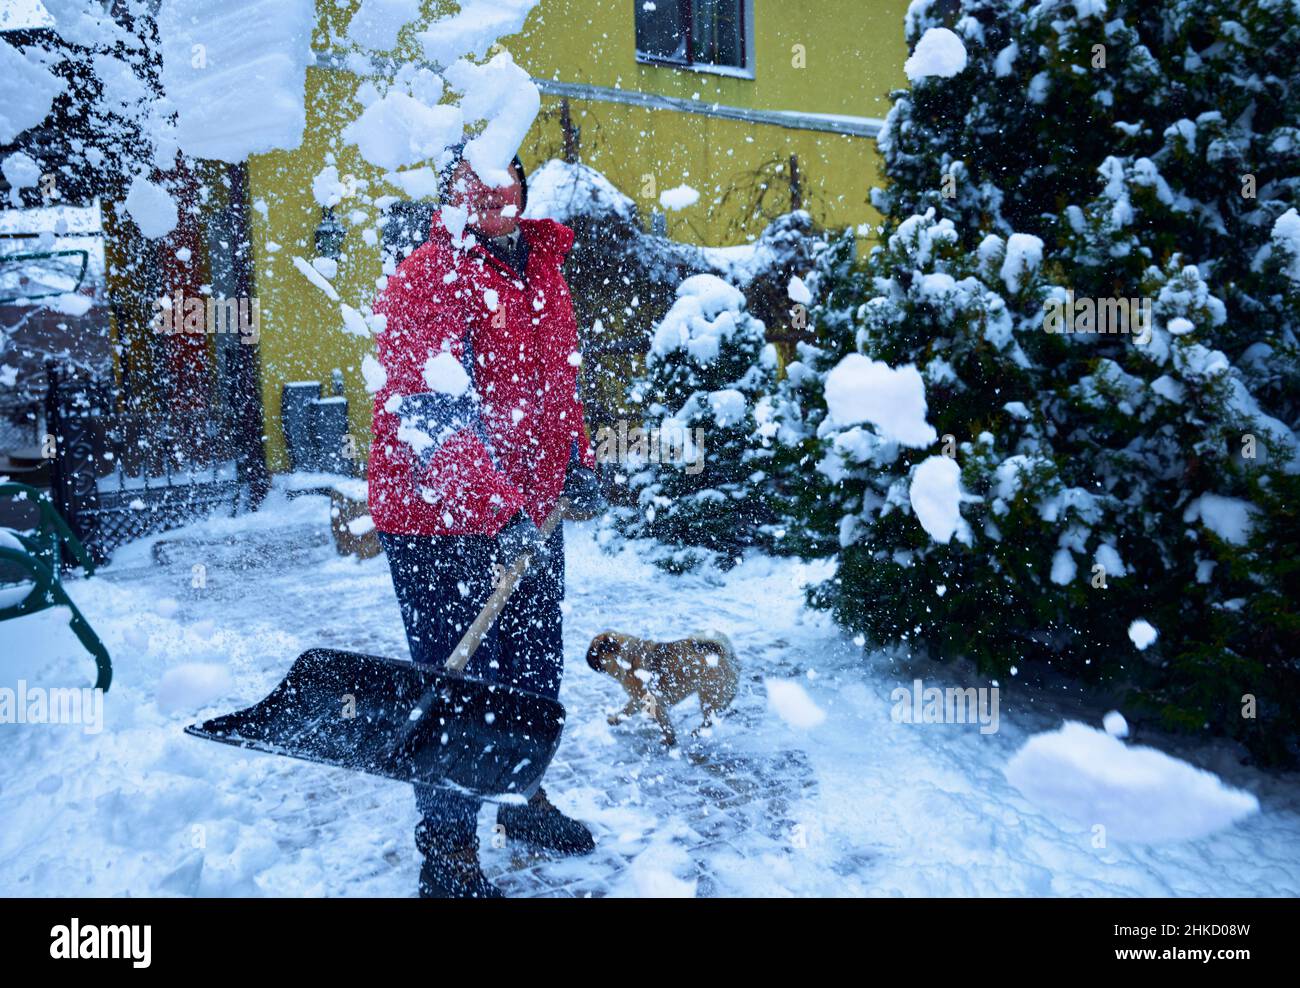 Mature adult woman with snow shovel shoveling snow with  pug breed dogs in snow covered yard. Stock Photo